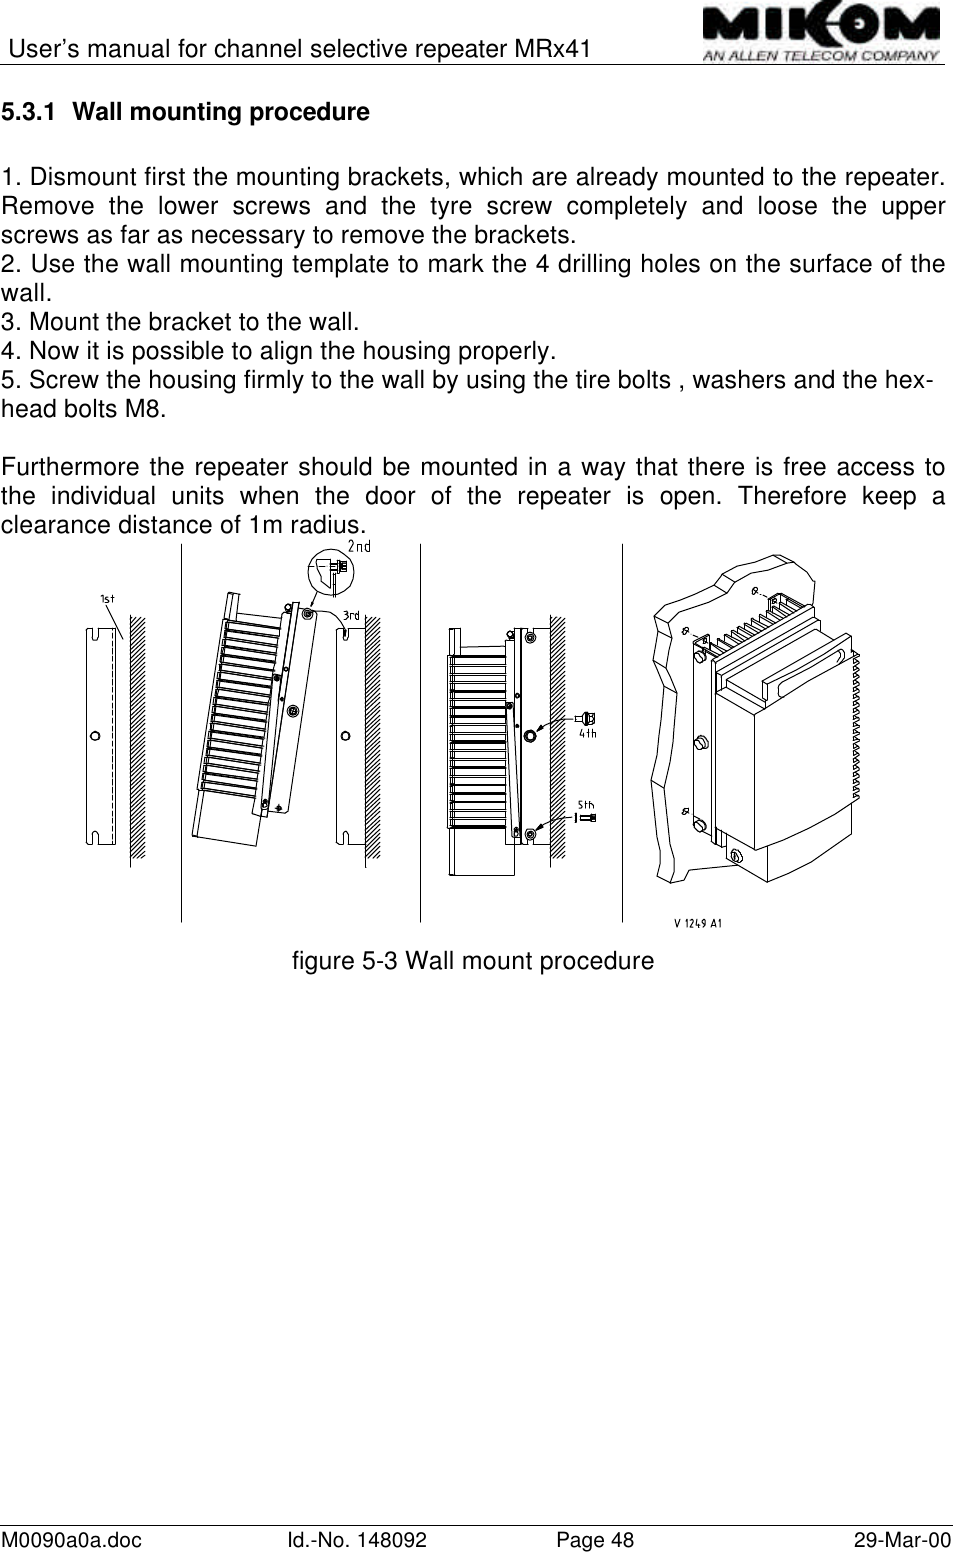 User’s manual for channel selective repeater MRx41M0090a0a.doc Id.-No. 148092 Page 48 29-Mar-005.3.1 Wall mounting procedure1. Dismount first the mounting brackets, which are already mounted to the repeater.Remove the lower screws and the tyre screw completely and loose the upperscrews as far as necessary to remove the brackets.2. Use the wall mounting template to mark the 4 drilling holes on the surface of thewall.3. Mount the bracket to the wall.4. Now it is possible to align the housing properly.5. Screw the housing firmly to the wall by using the tire bolts , washers and the hex-head bolts M8.Furthermore the repeater should be mounted in a way that there is free access tothe individual units when the door of the repeater is open. Therefore keep aclearance distance of 1m radius.figure 5-3 Wall mount procedure